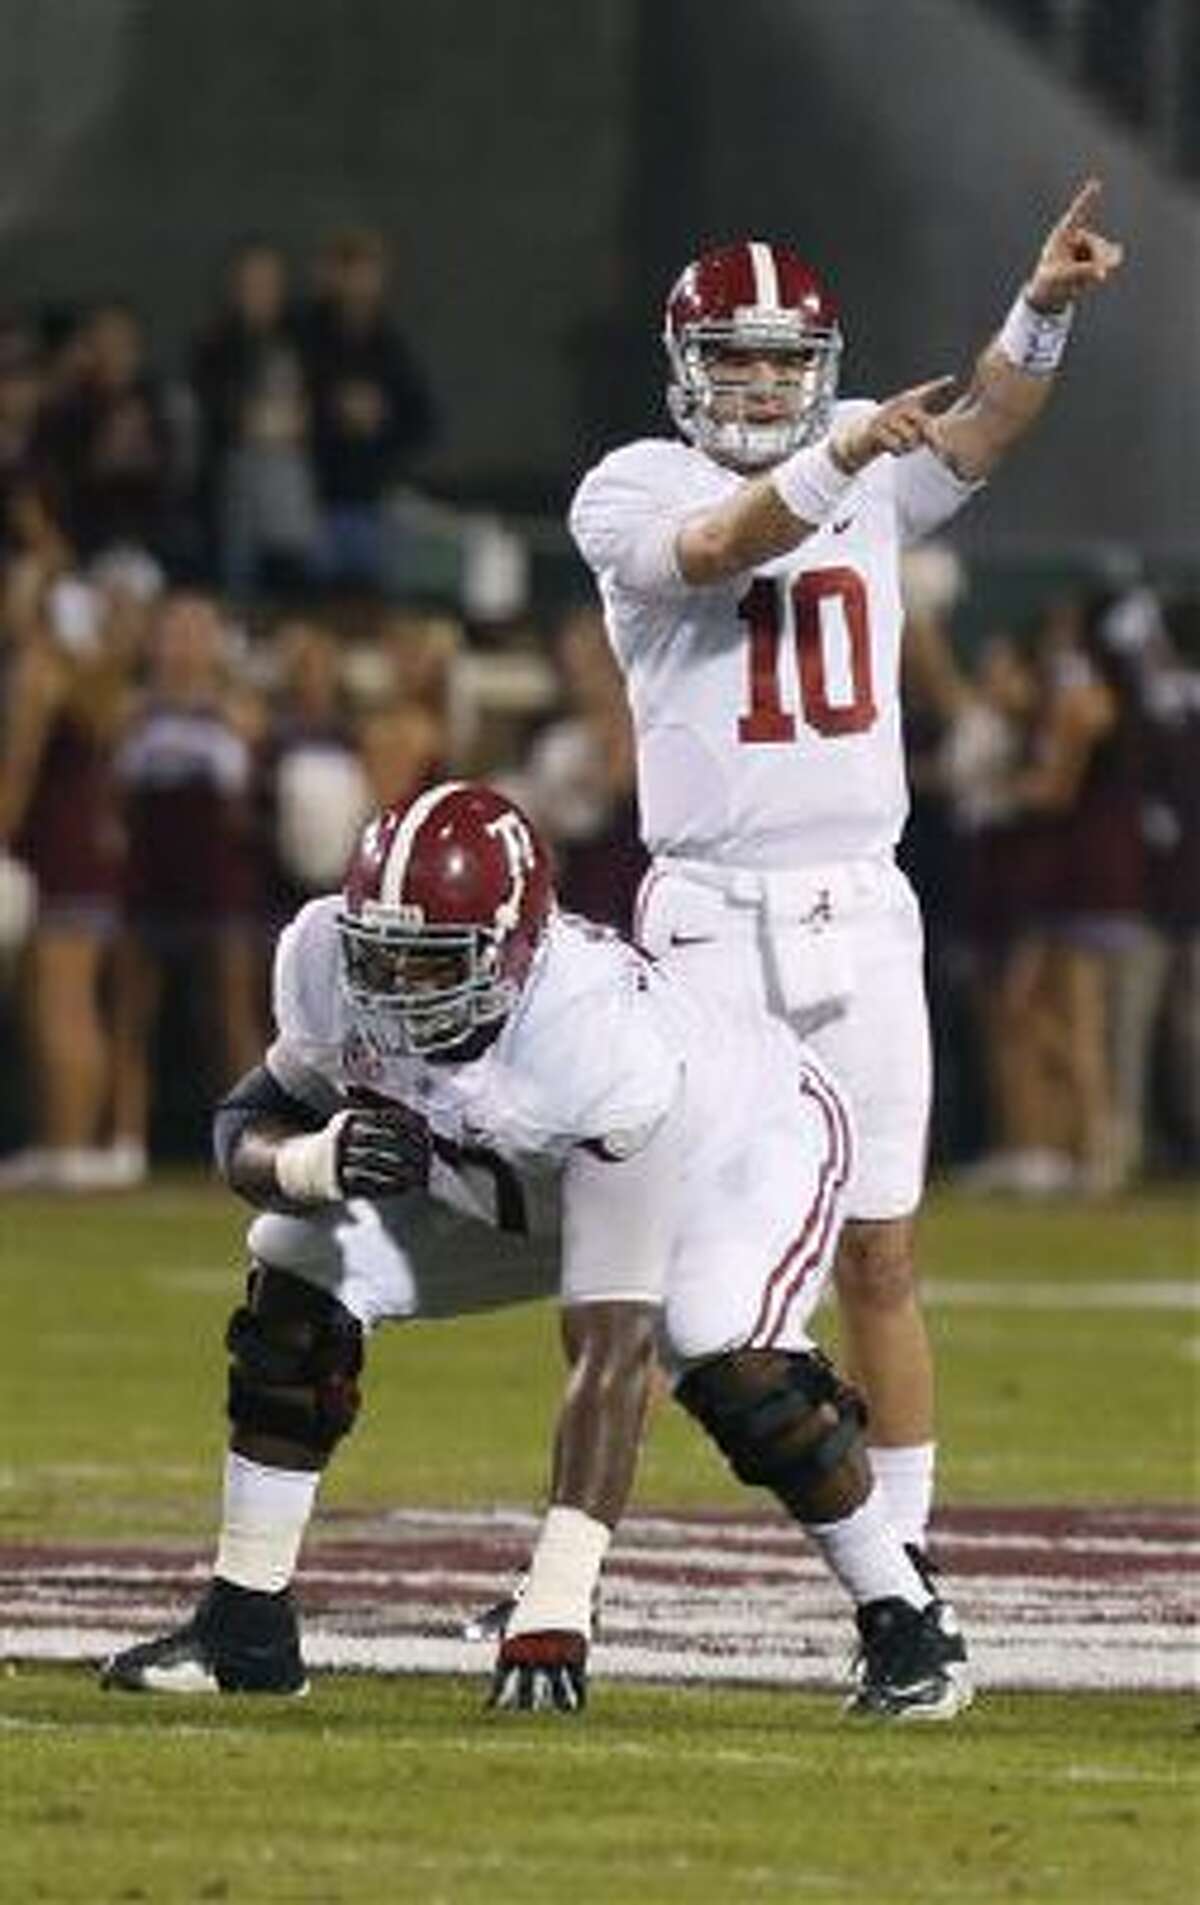 Alabama quarterback AJ McCarron (10) directs his team against Mississippi State during the first half of a game Saturday in Starkville, Miss. Alabama won 20-7.